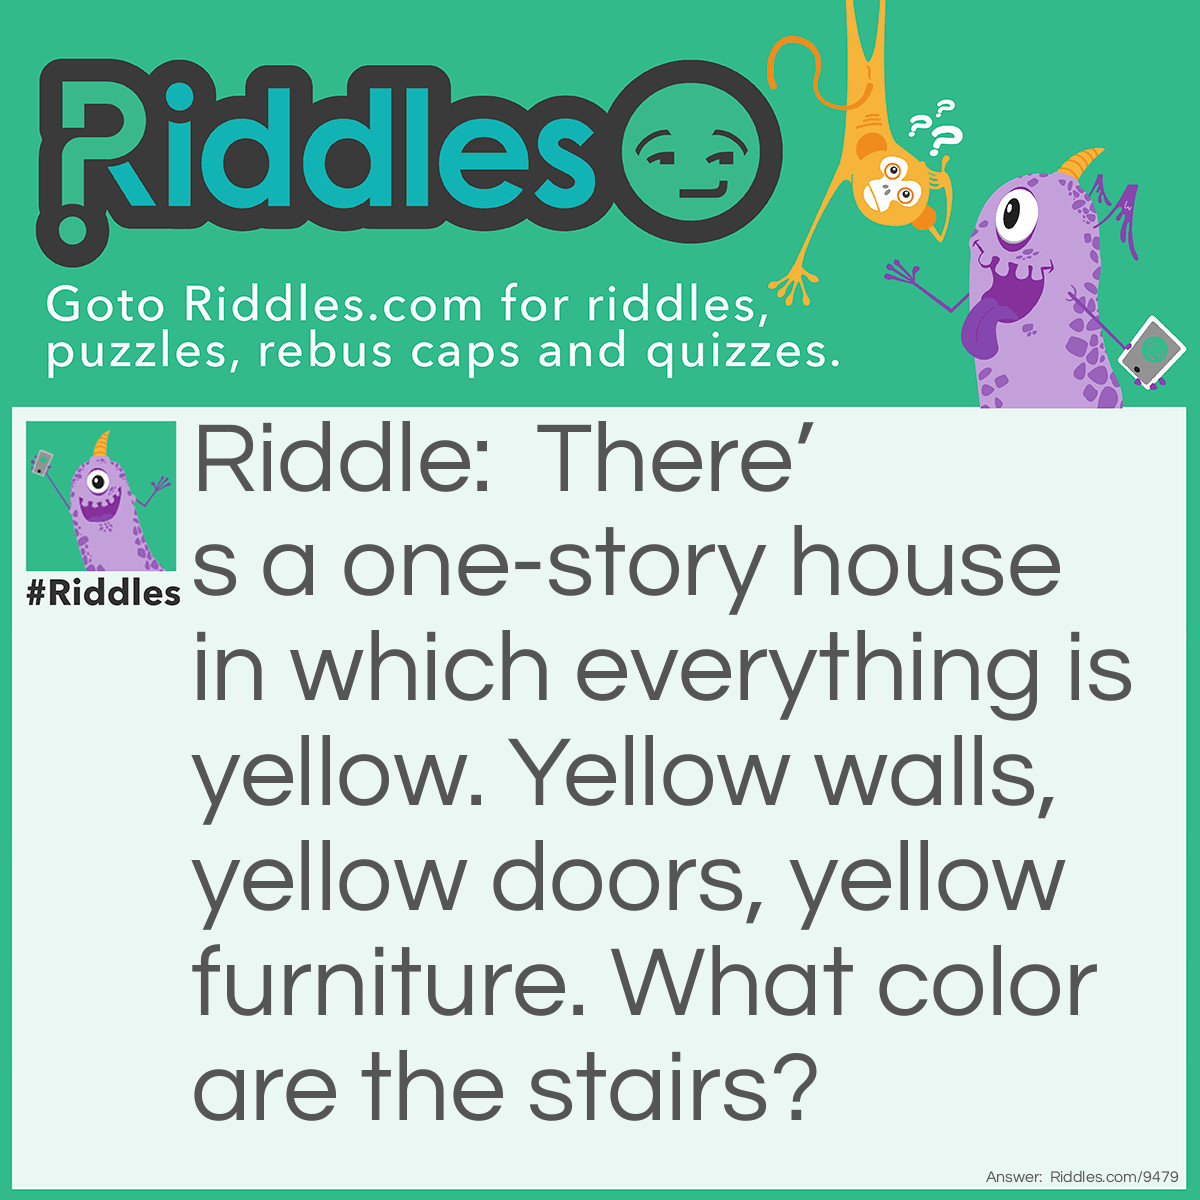 Riddle: There's a one-story house in which everything is yellow. Yellow walls, yellow doors, yellow furniture. What color are the stairs? Answer: Answer: There aren’t any—it’s a one-story house.